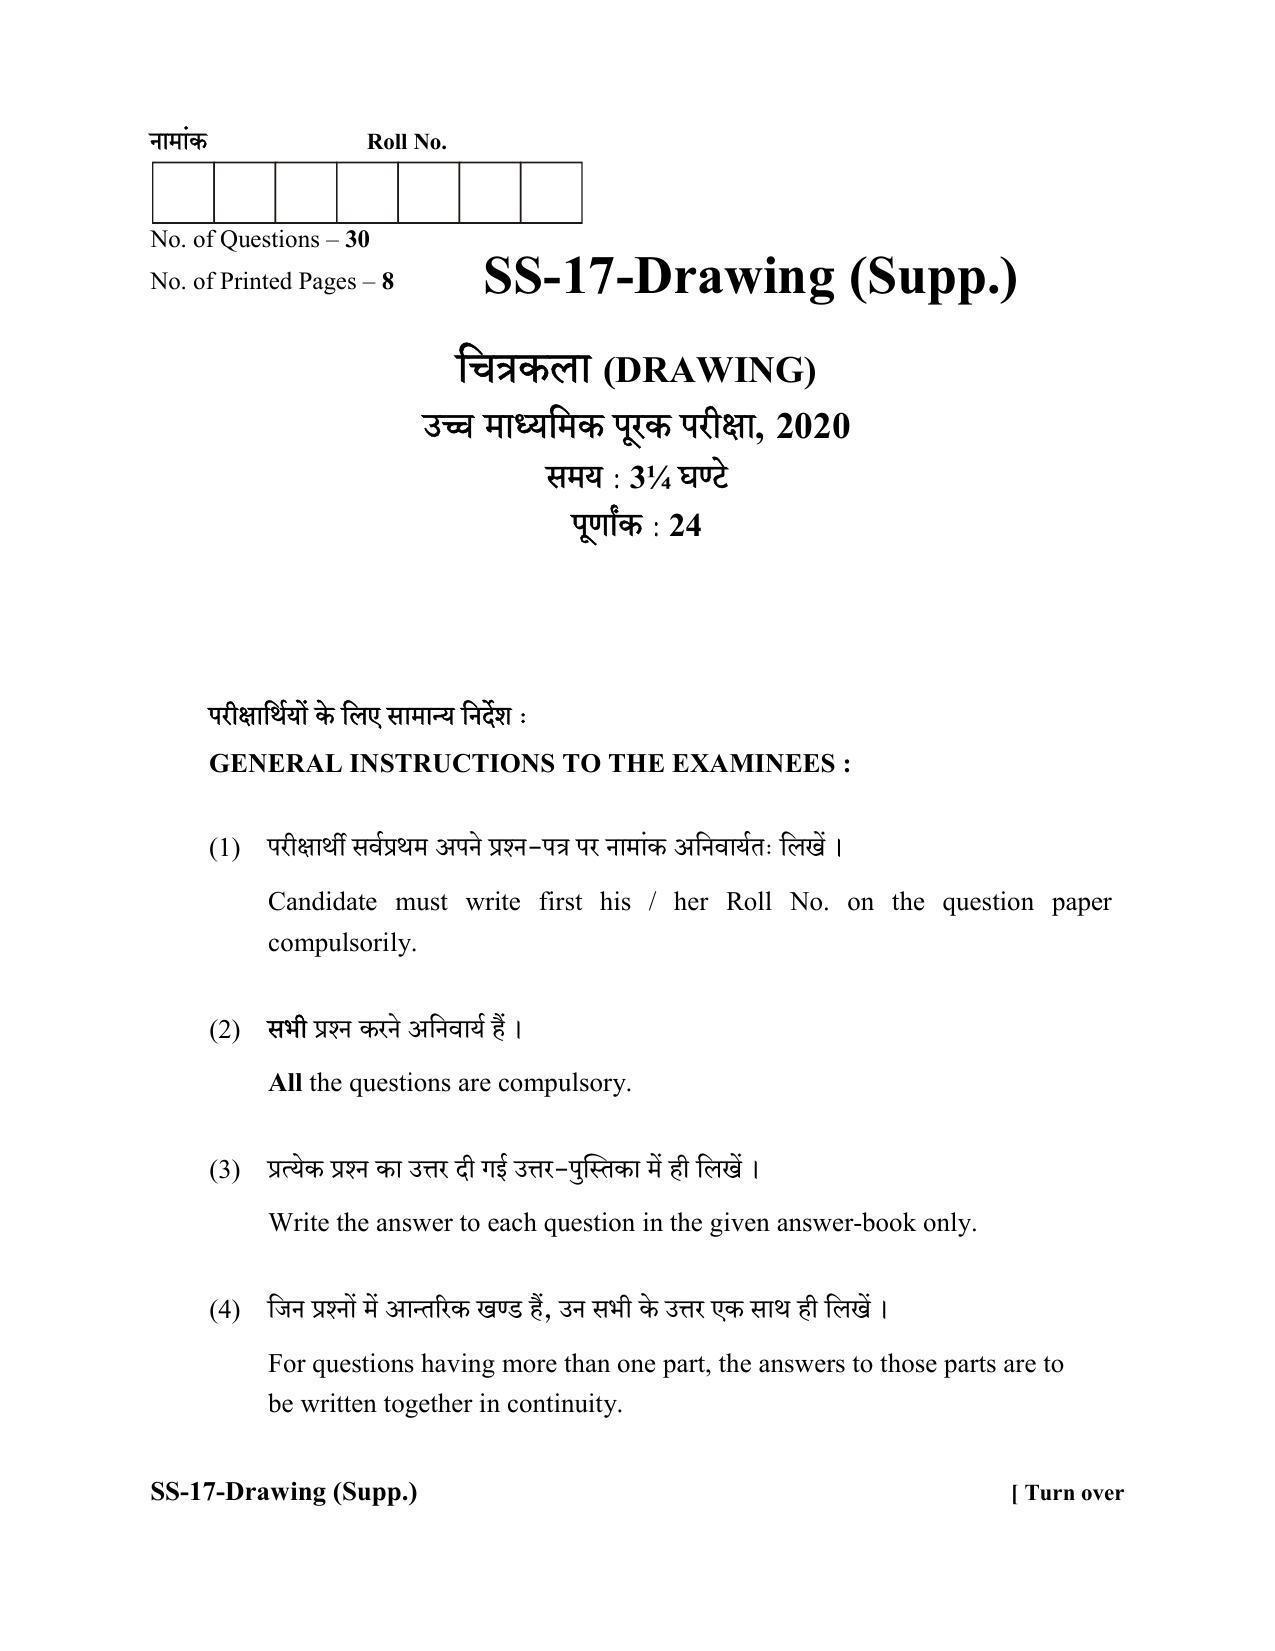 Question 28 (OR 1st question) - CBSE Class 10 Sample Paper for 2020 Bo